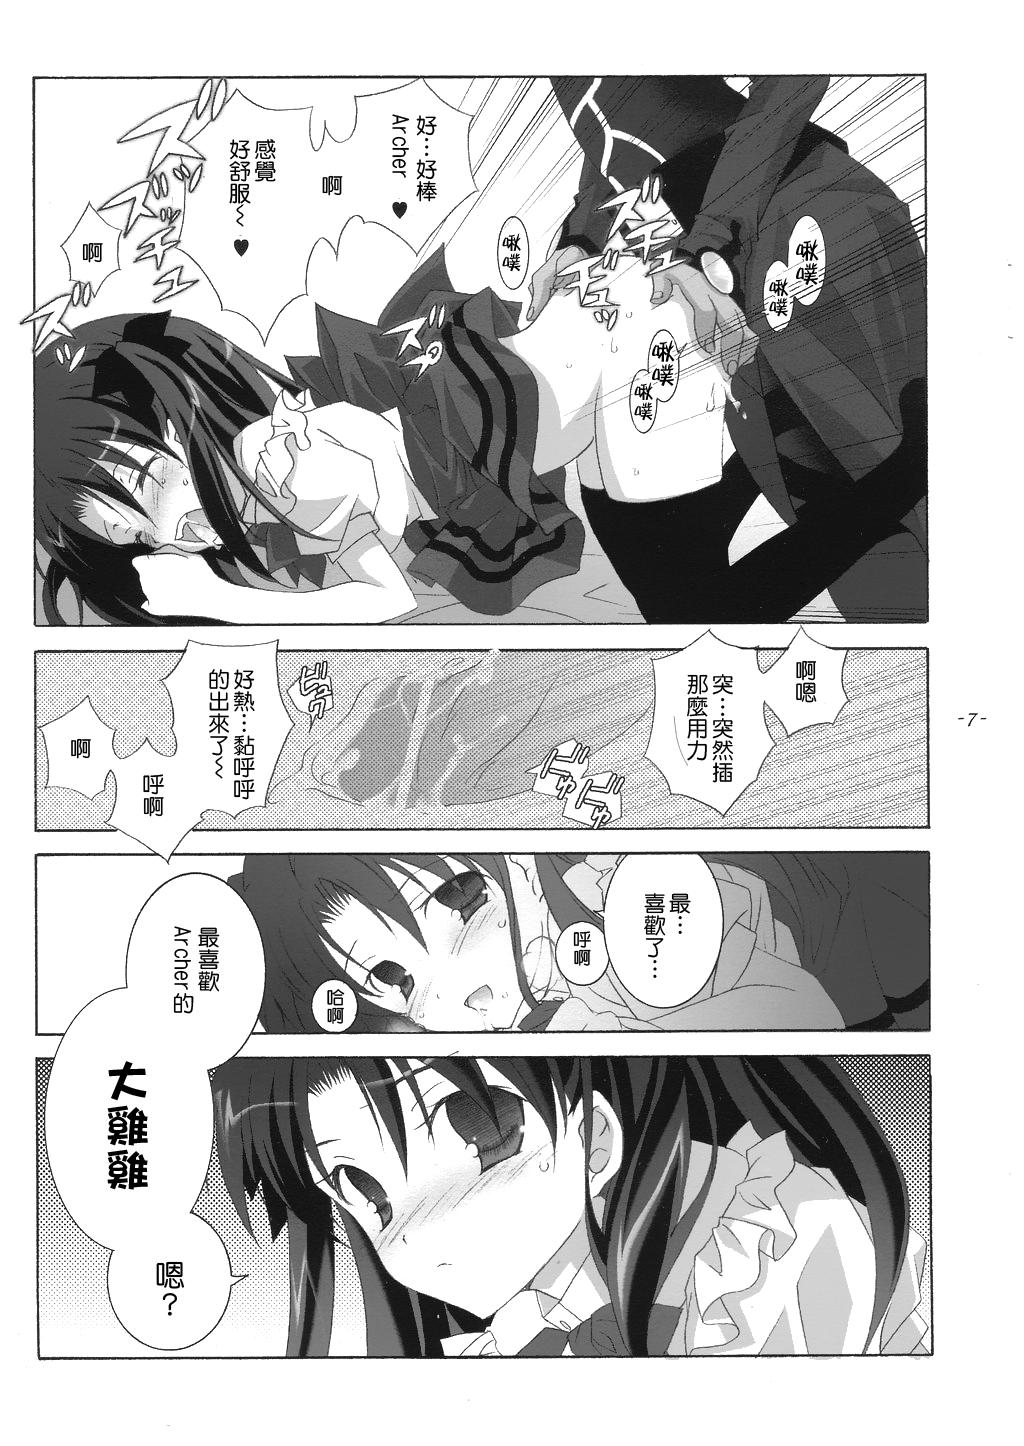 Facial Cute Honey - Fate stay night Trimmed - Page 6